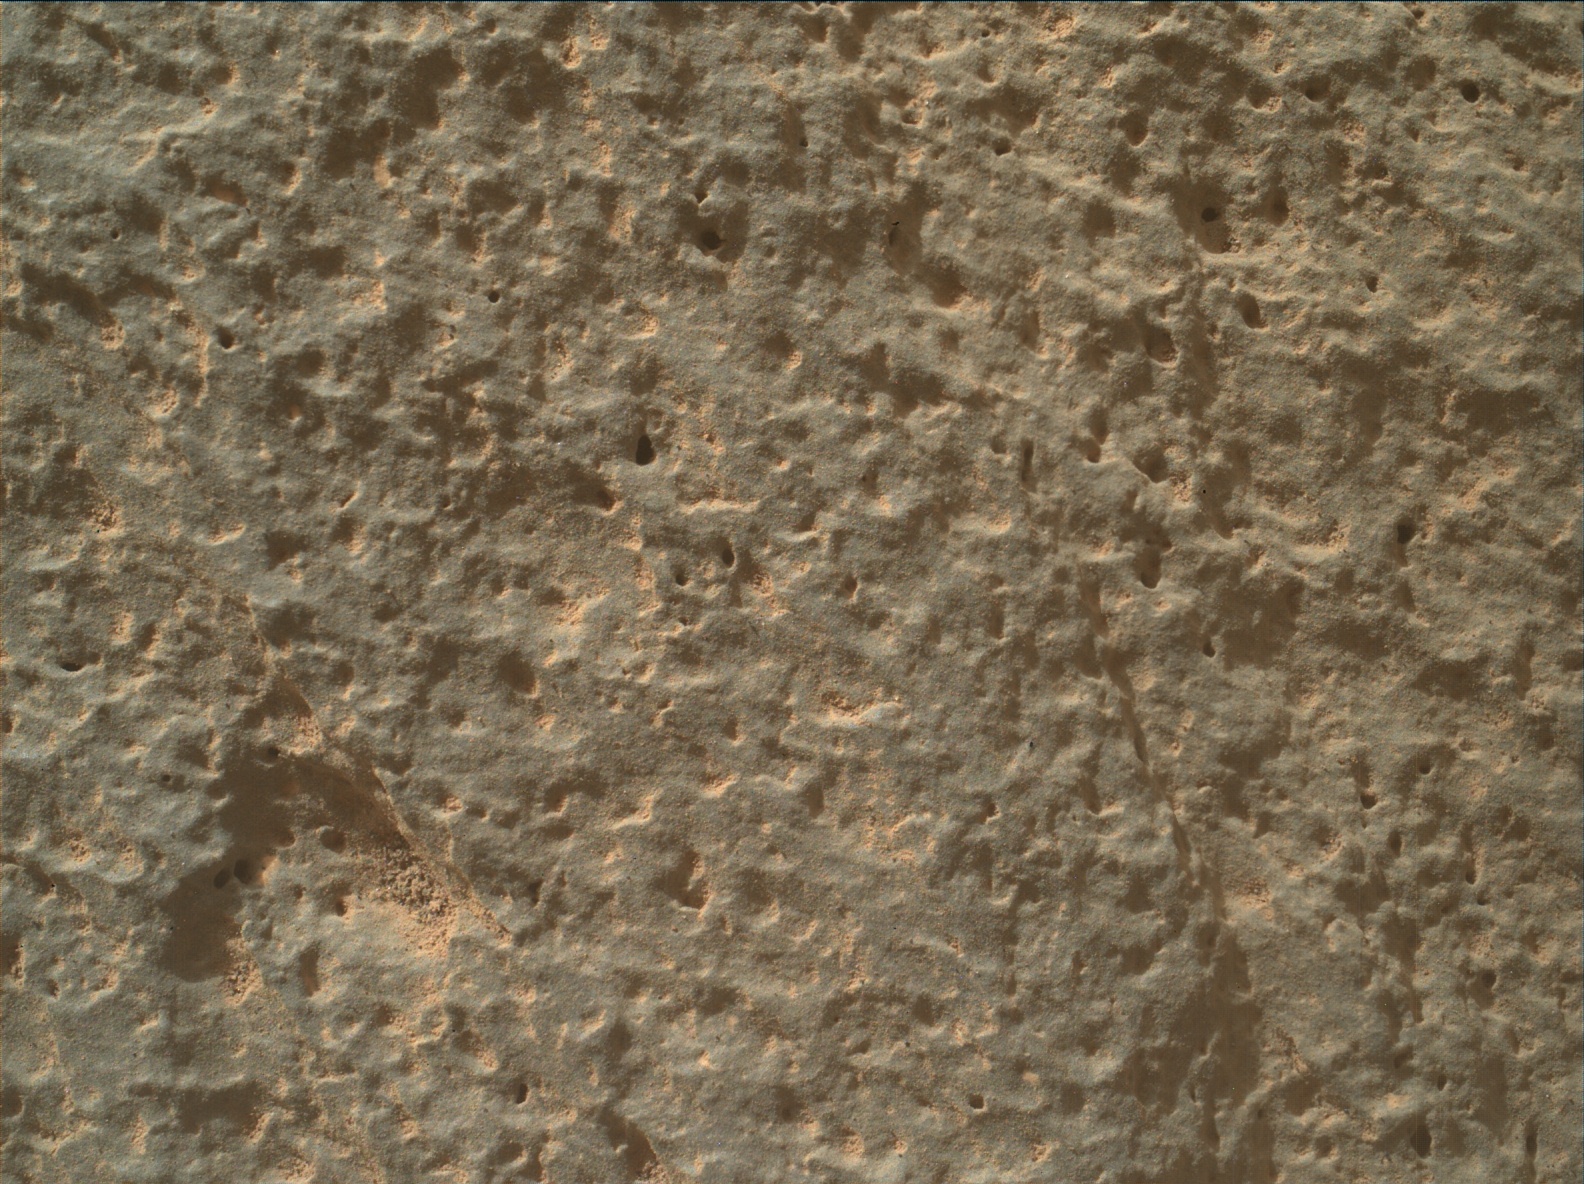 Nasa's Mars rover Curiosity acquired this image using its Mars Hand Lens Imager (MAHLI) on Sol 3433